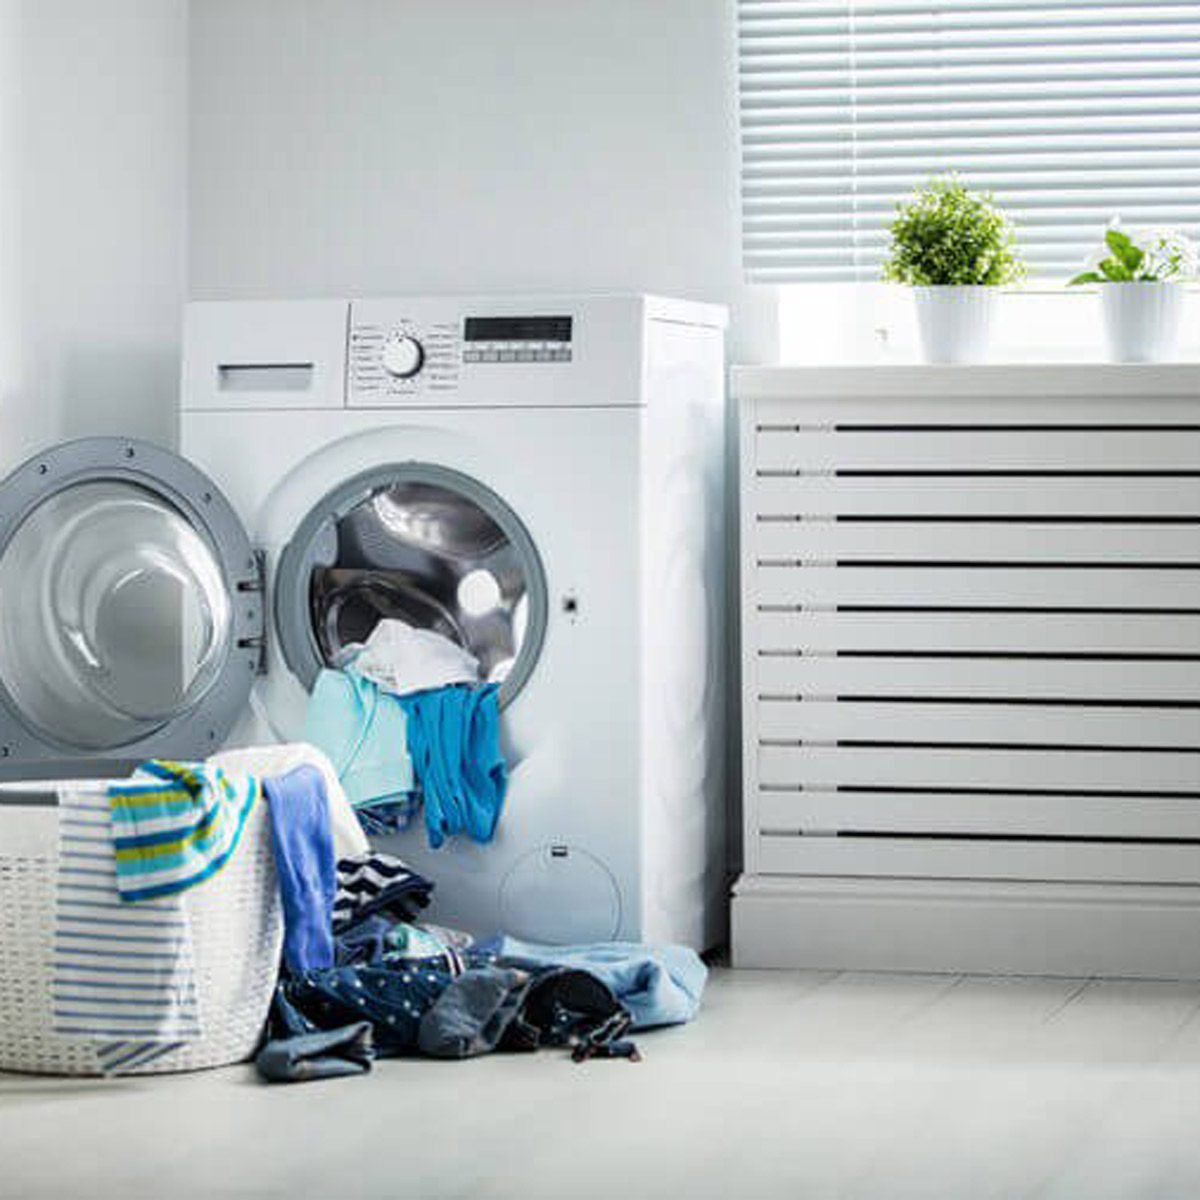 10 Laundry Mistakes You Didn’t Know You Were Making